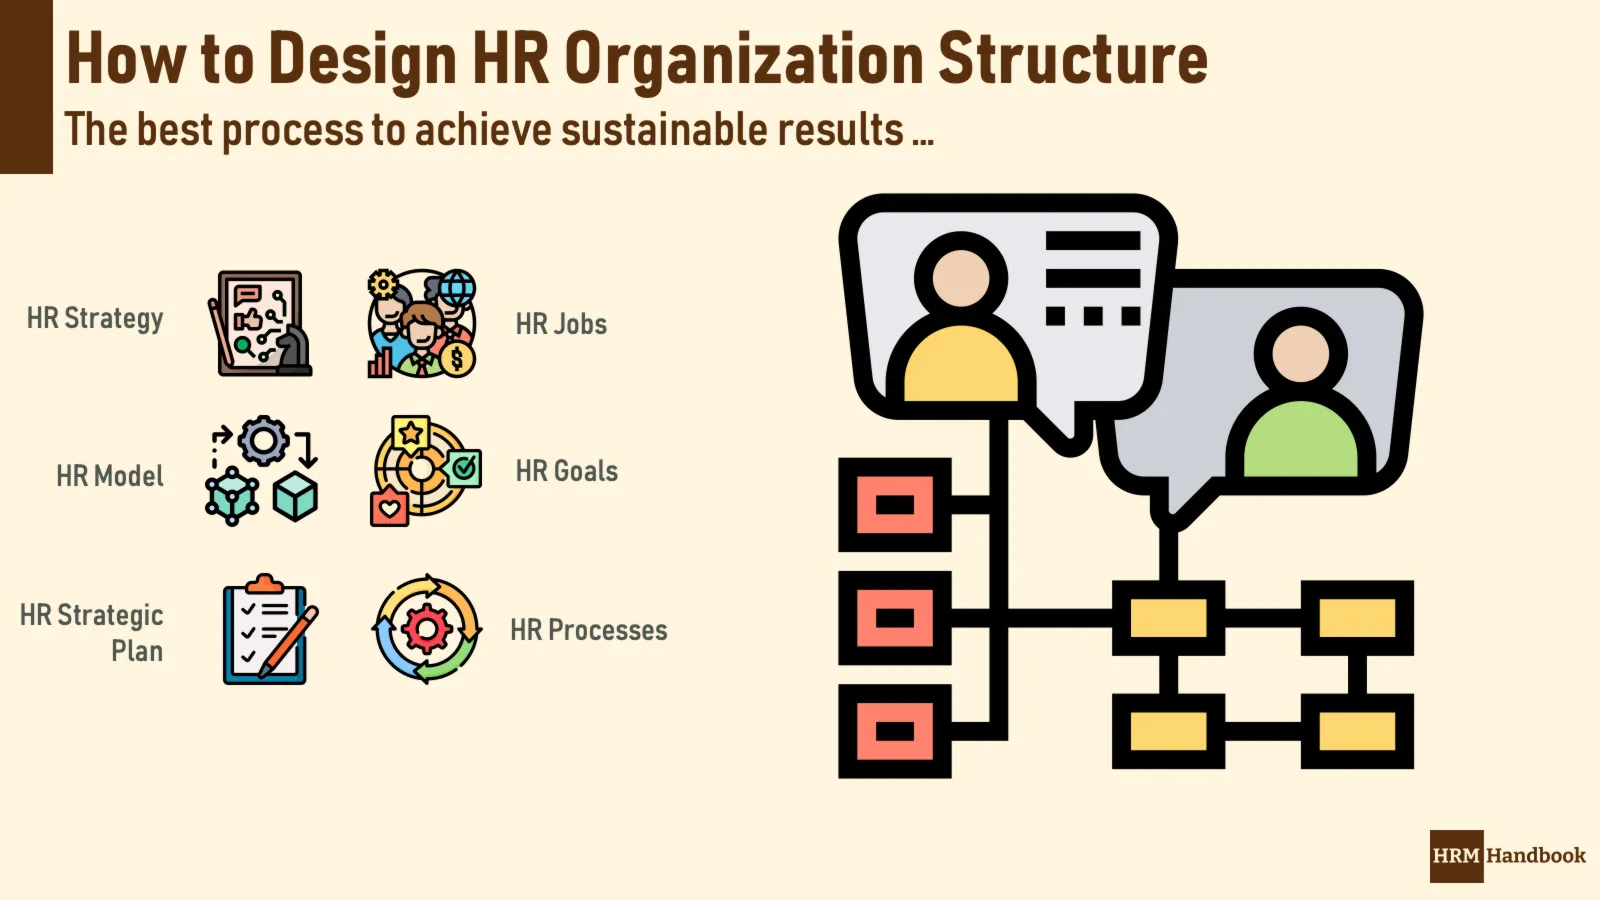 How to Design HR Organization Structure and what needs to be considered and evaluated like HR Processes, Jobs, HR Model and Strategy